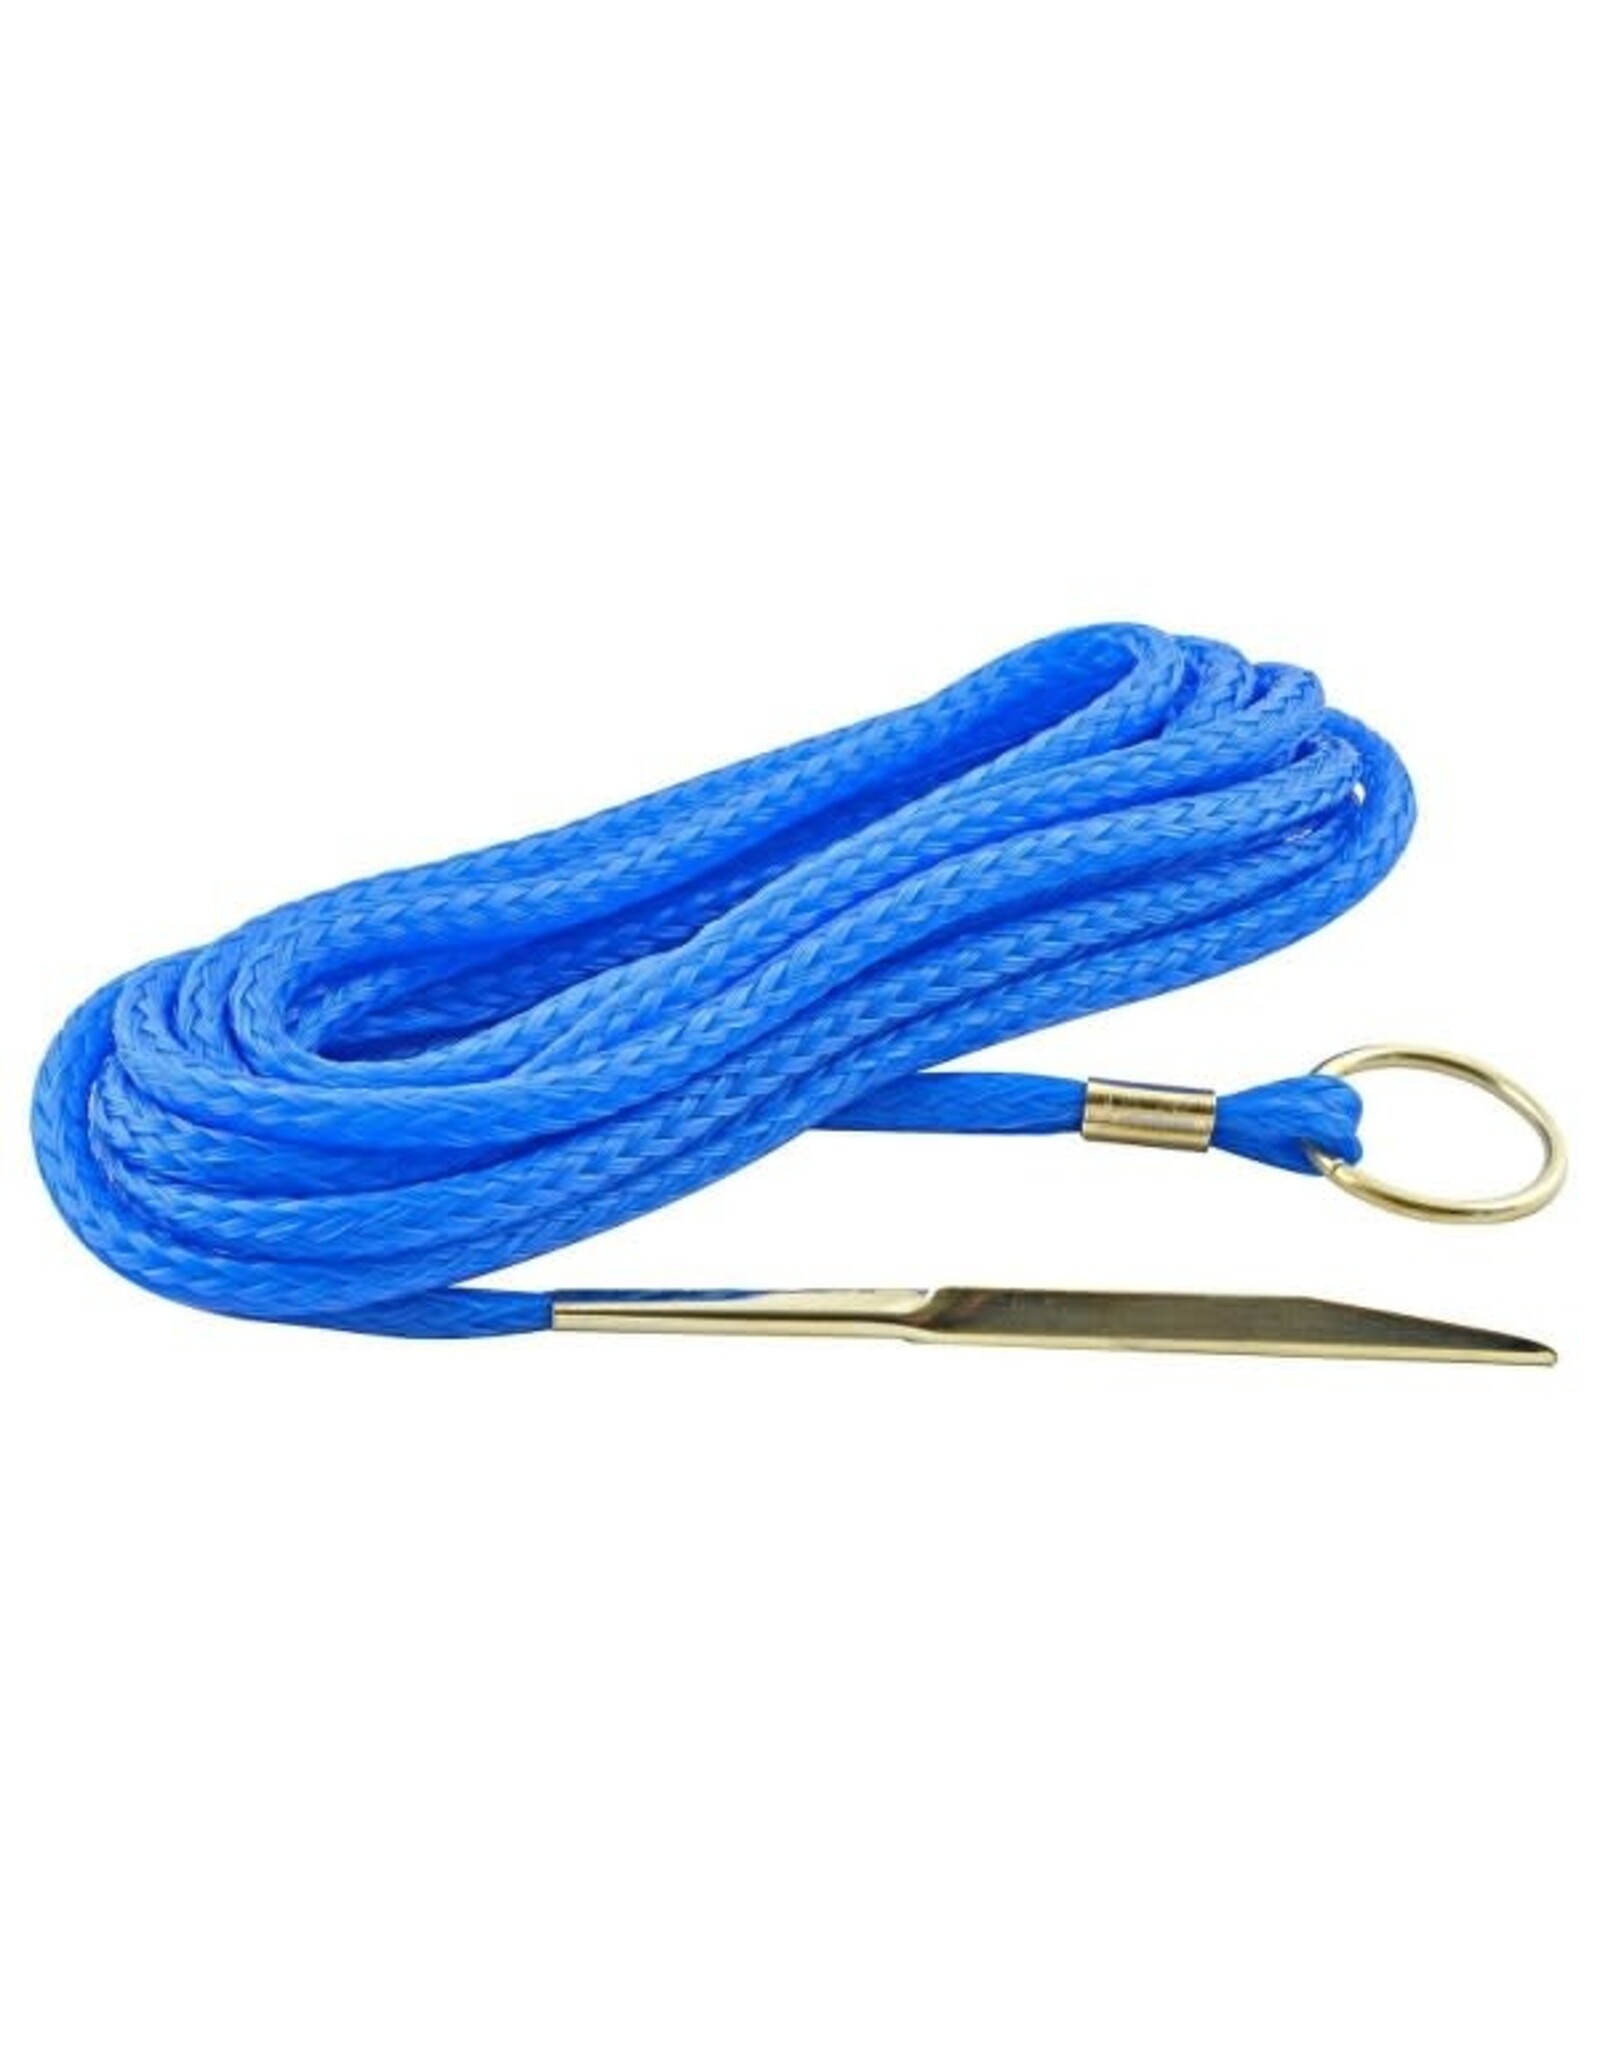 Danielson Braided Polycord Stringer - 7-1/2 Ft